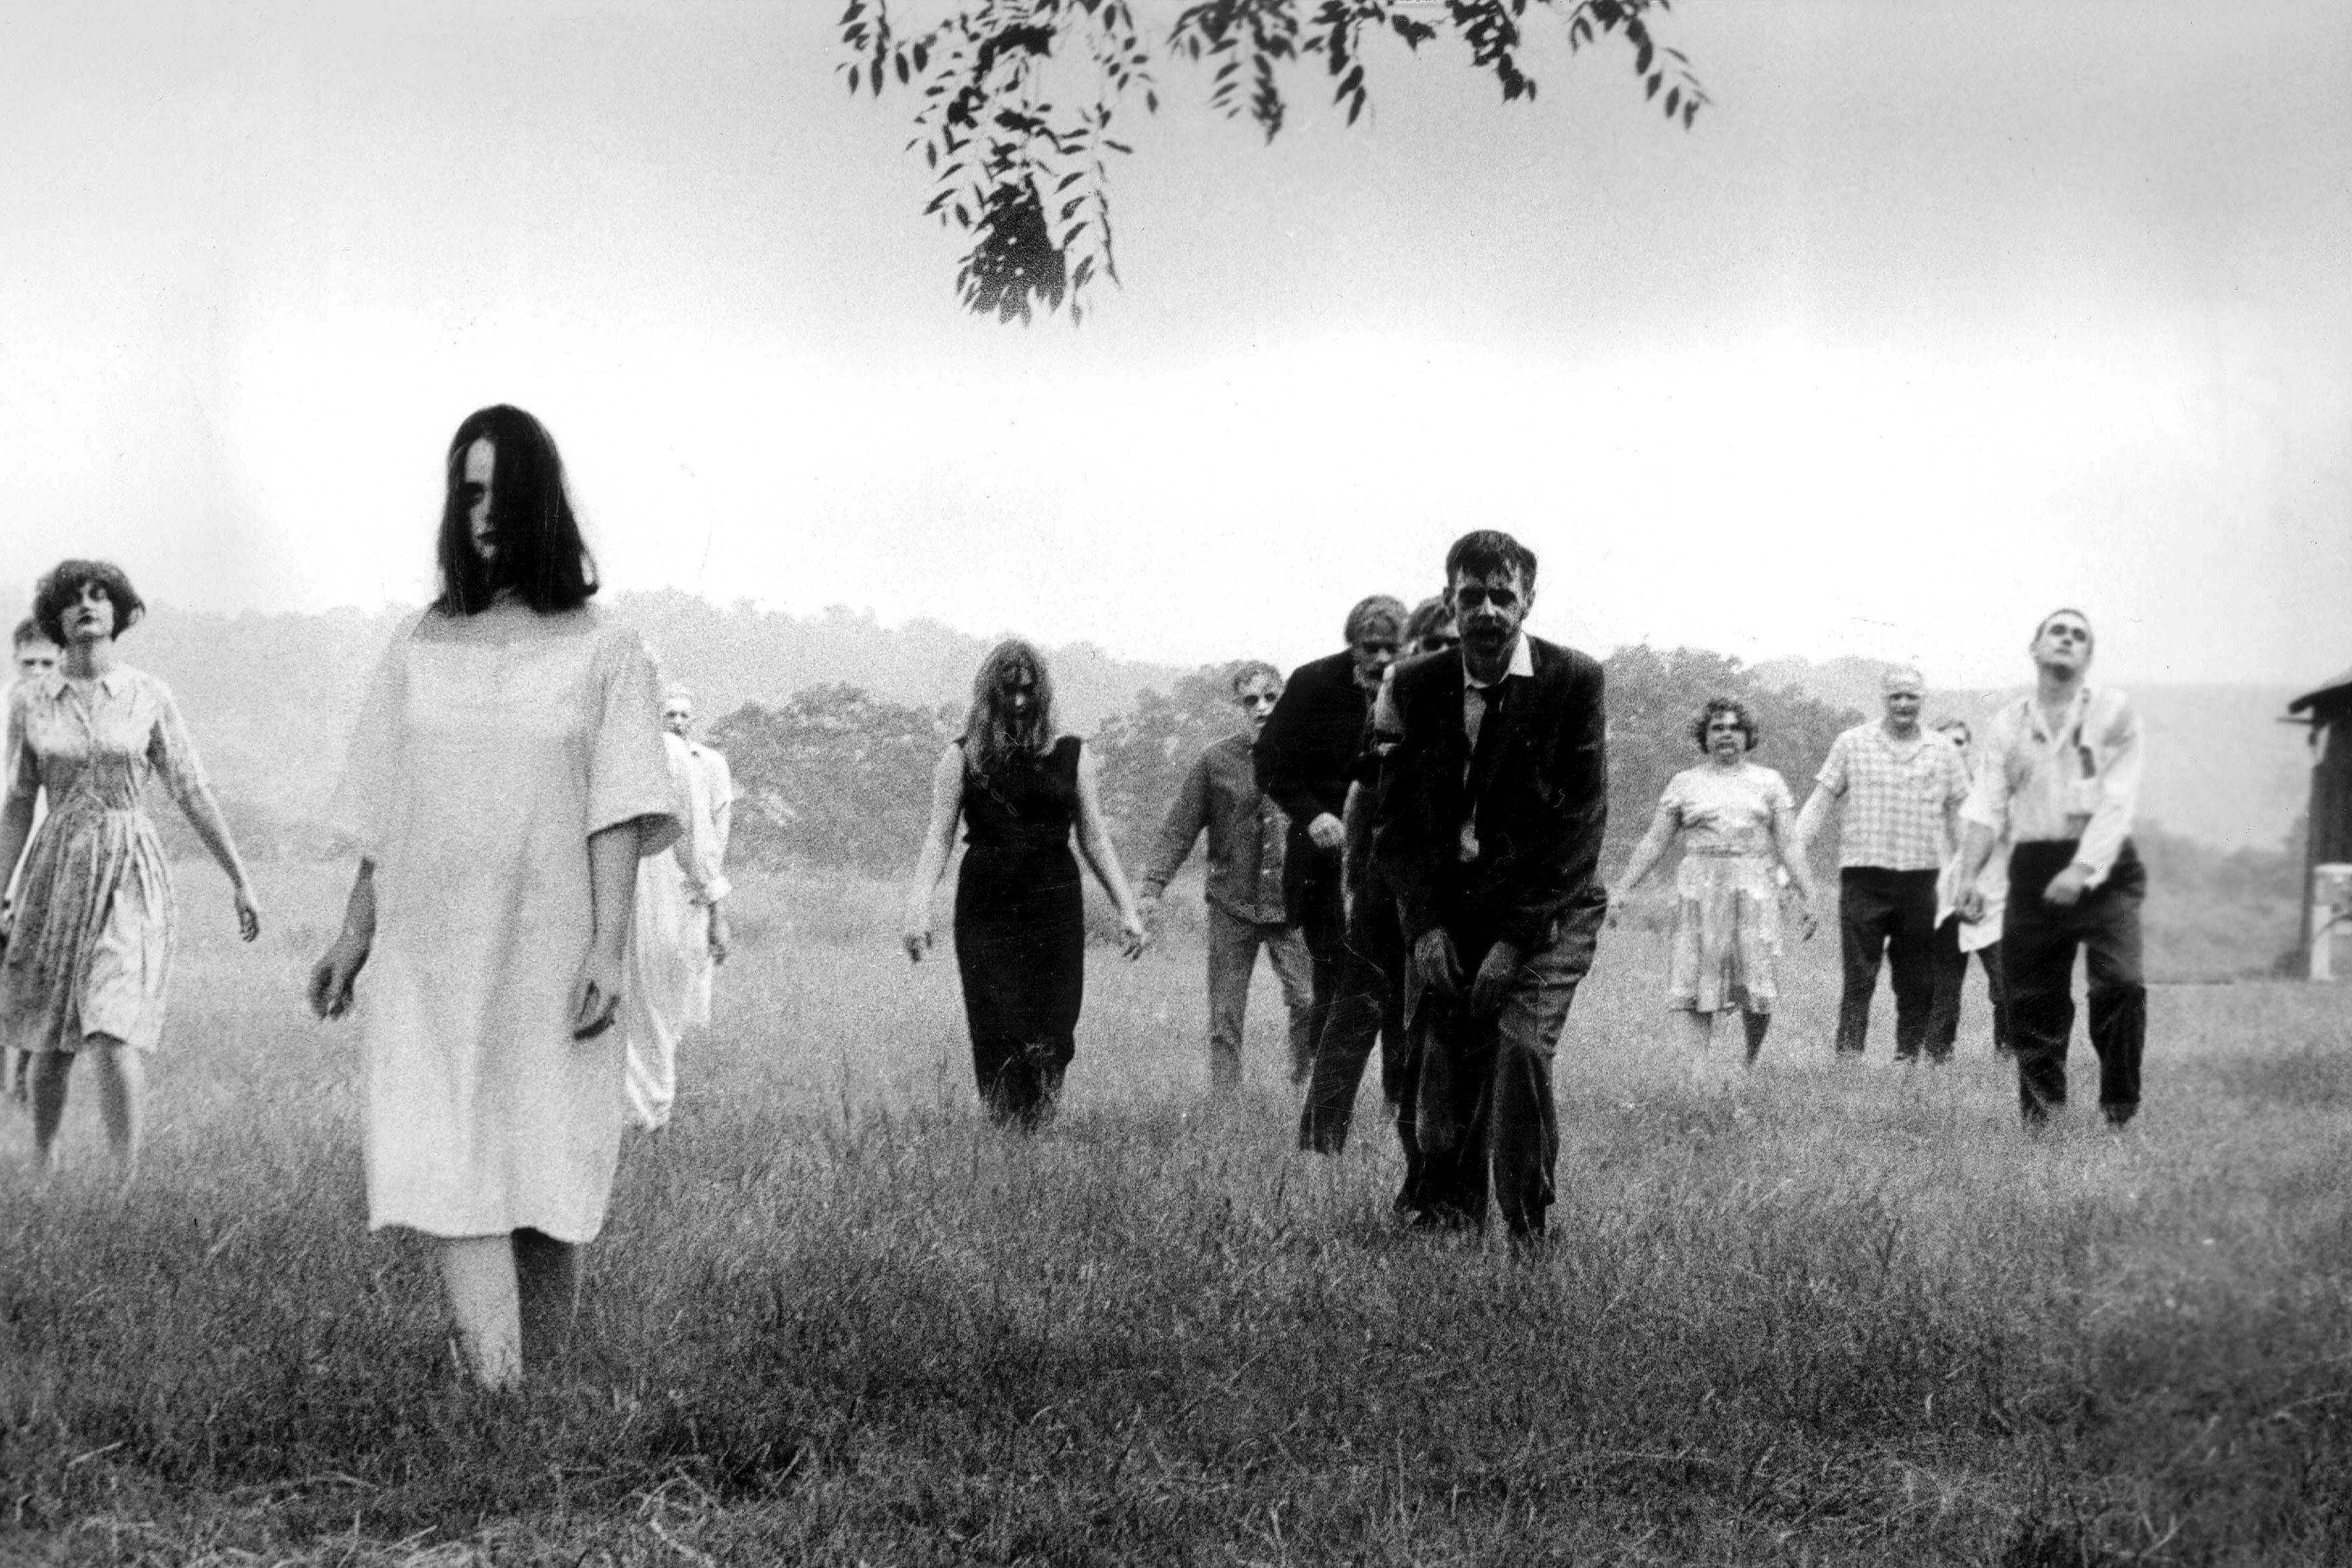 31 Days of Fright: Night of the Living Dead